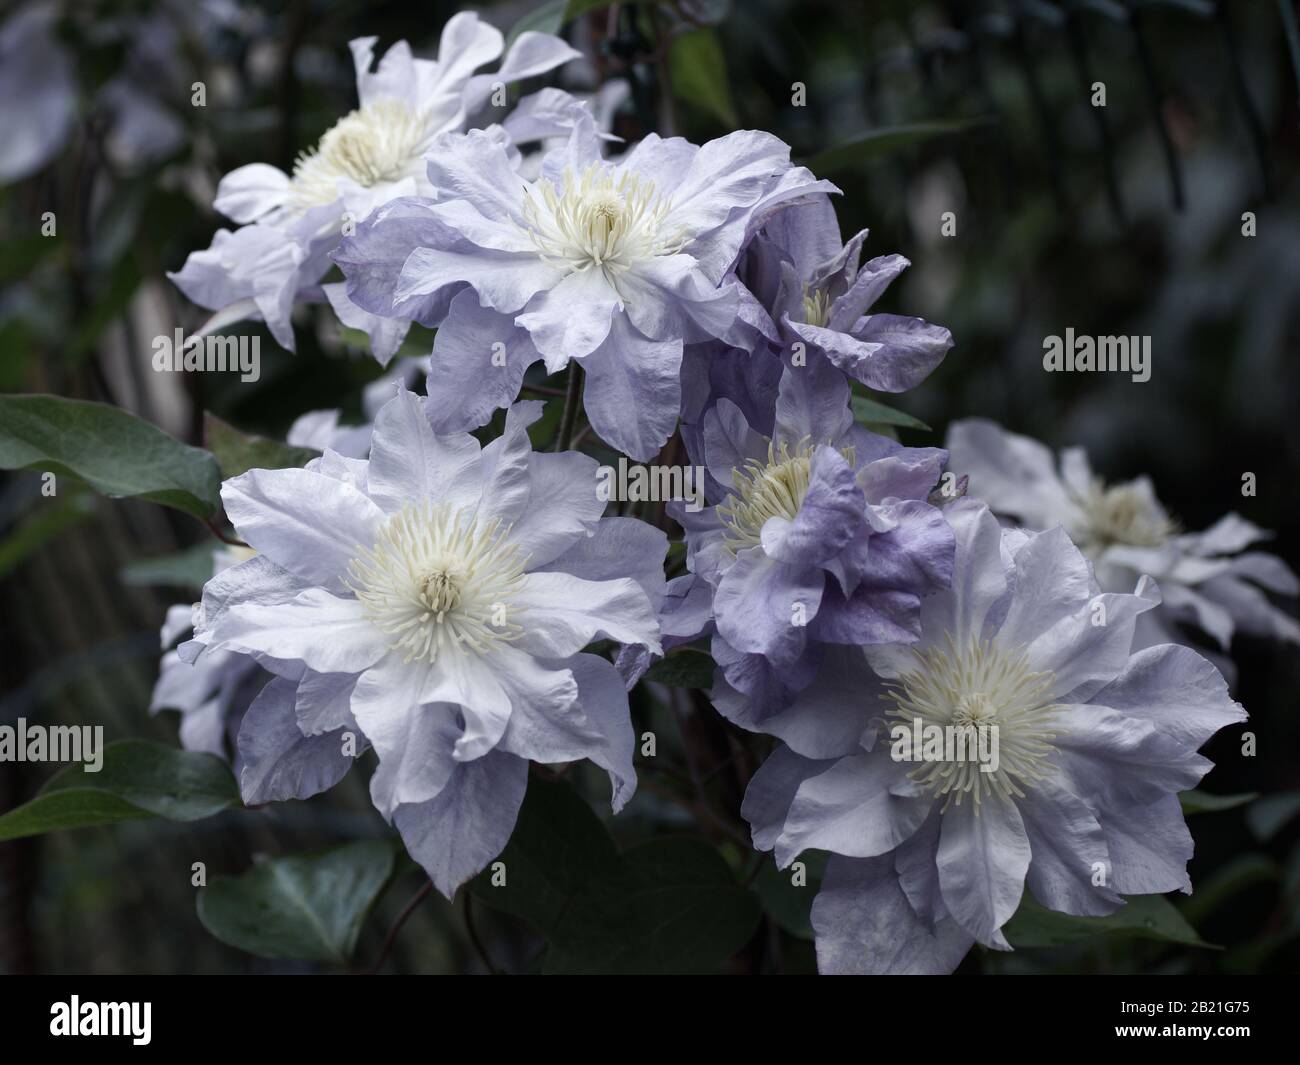 Beautiful double clematis flowers close-up. A plant in the garden, in the open. Stock Photo